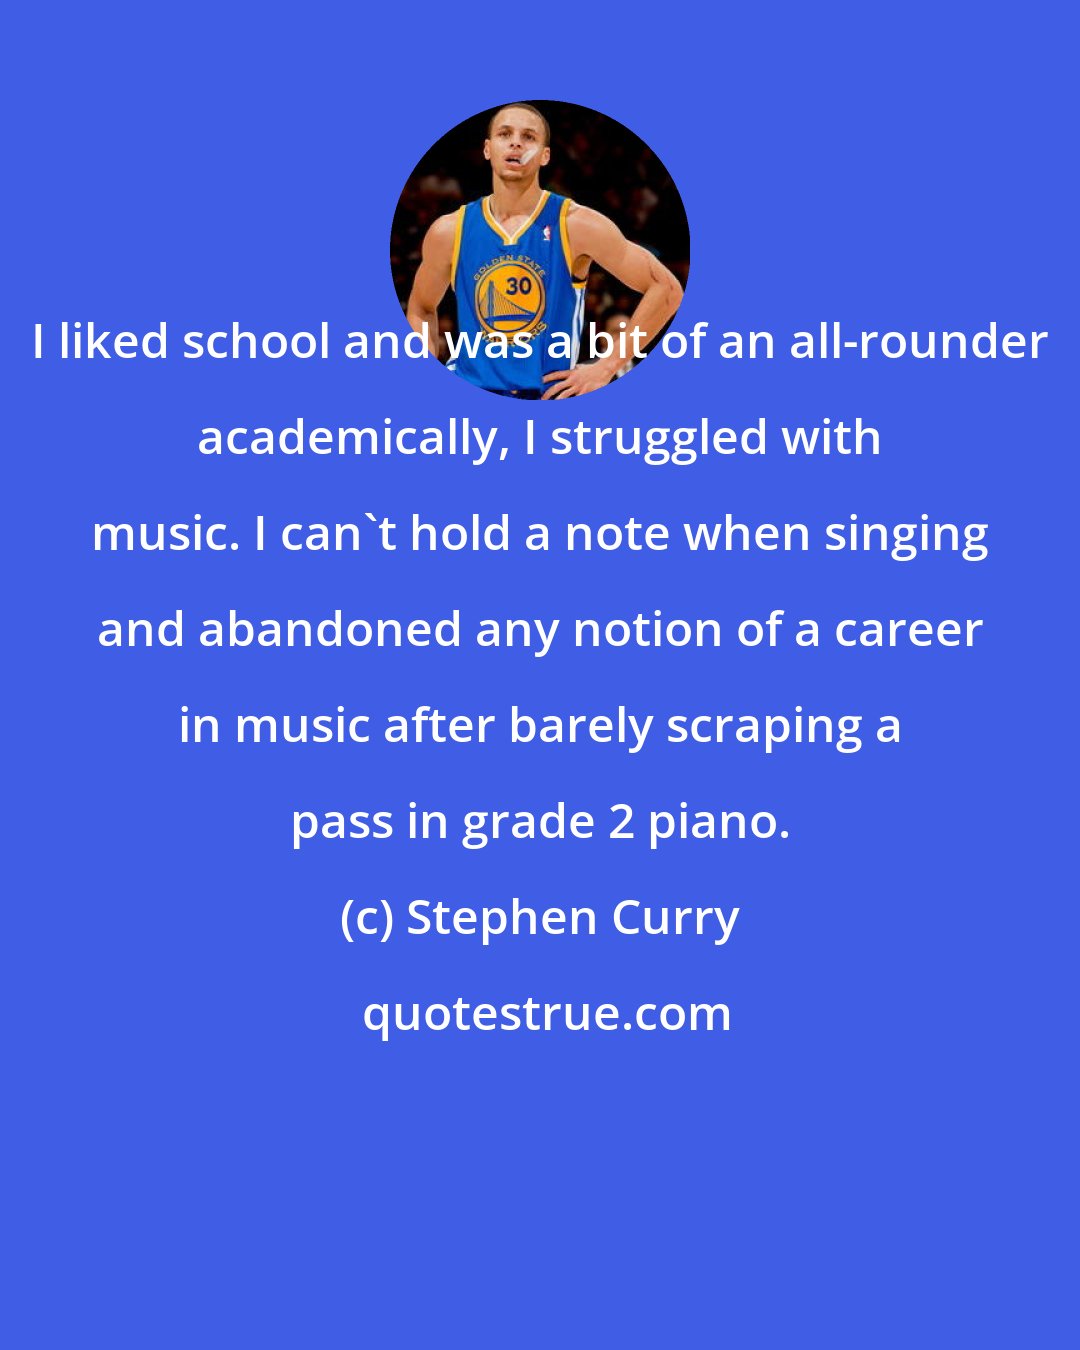 Stephen Curry: I liked school and was a bit of an all-rounder academically, I struggled with music. I can't hold a note when singing and abandoned any notion of a career in music after barely scraping a pass in grade 2 piano.